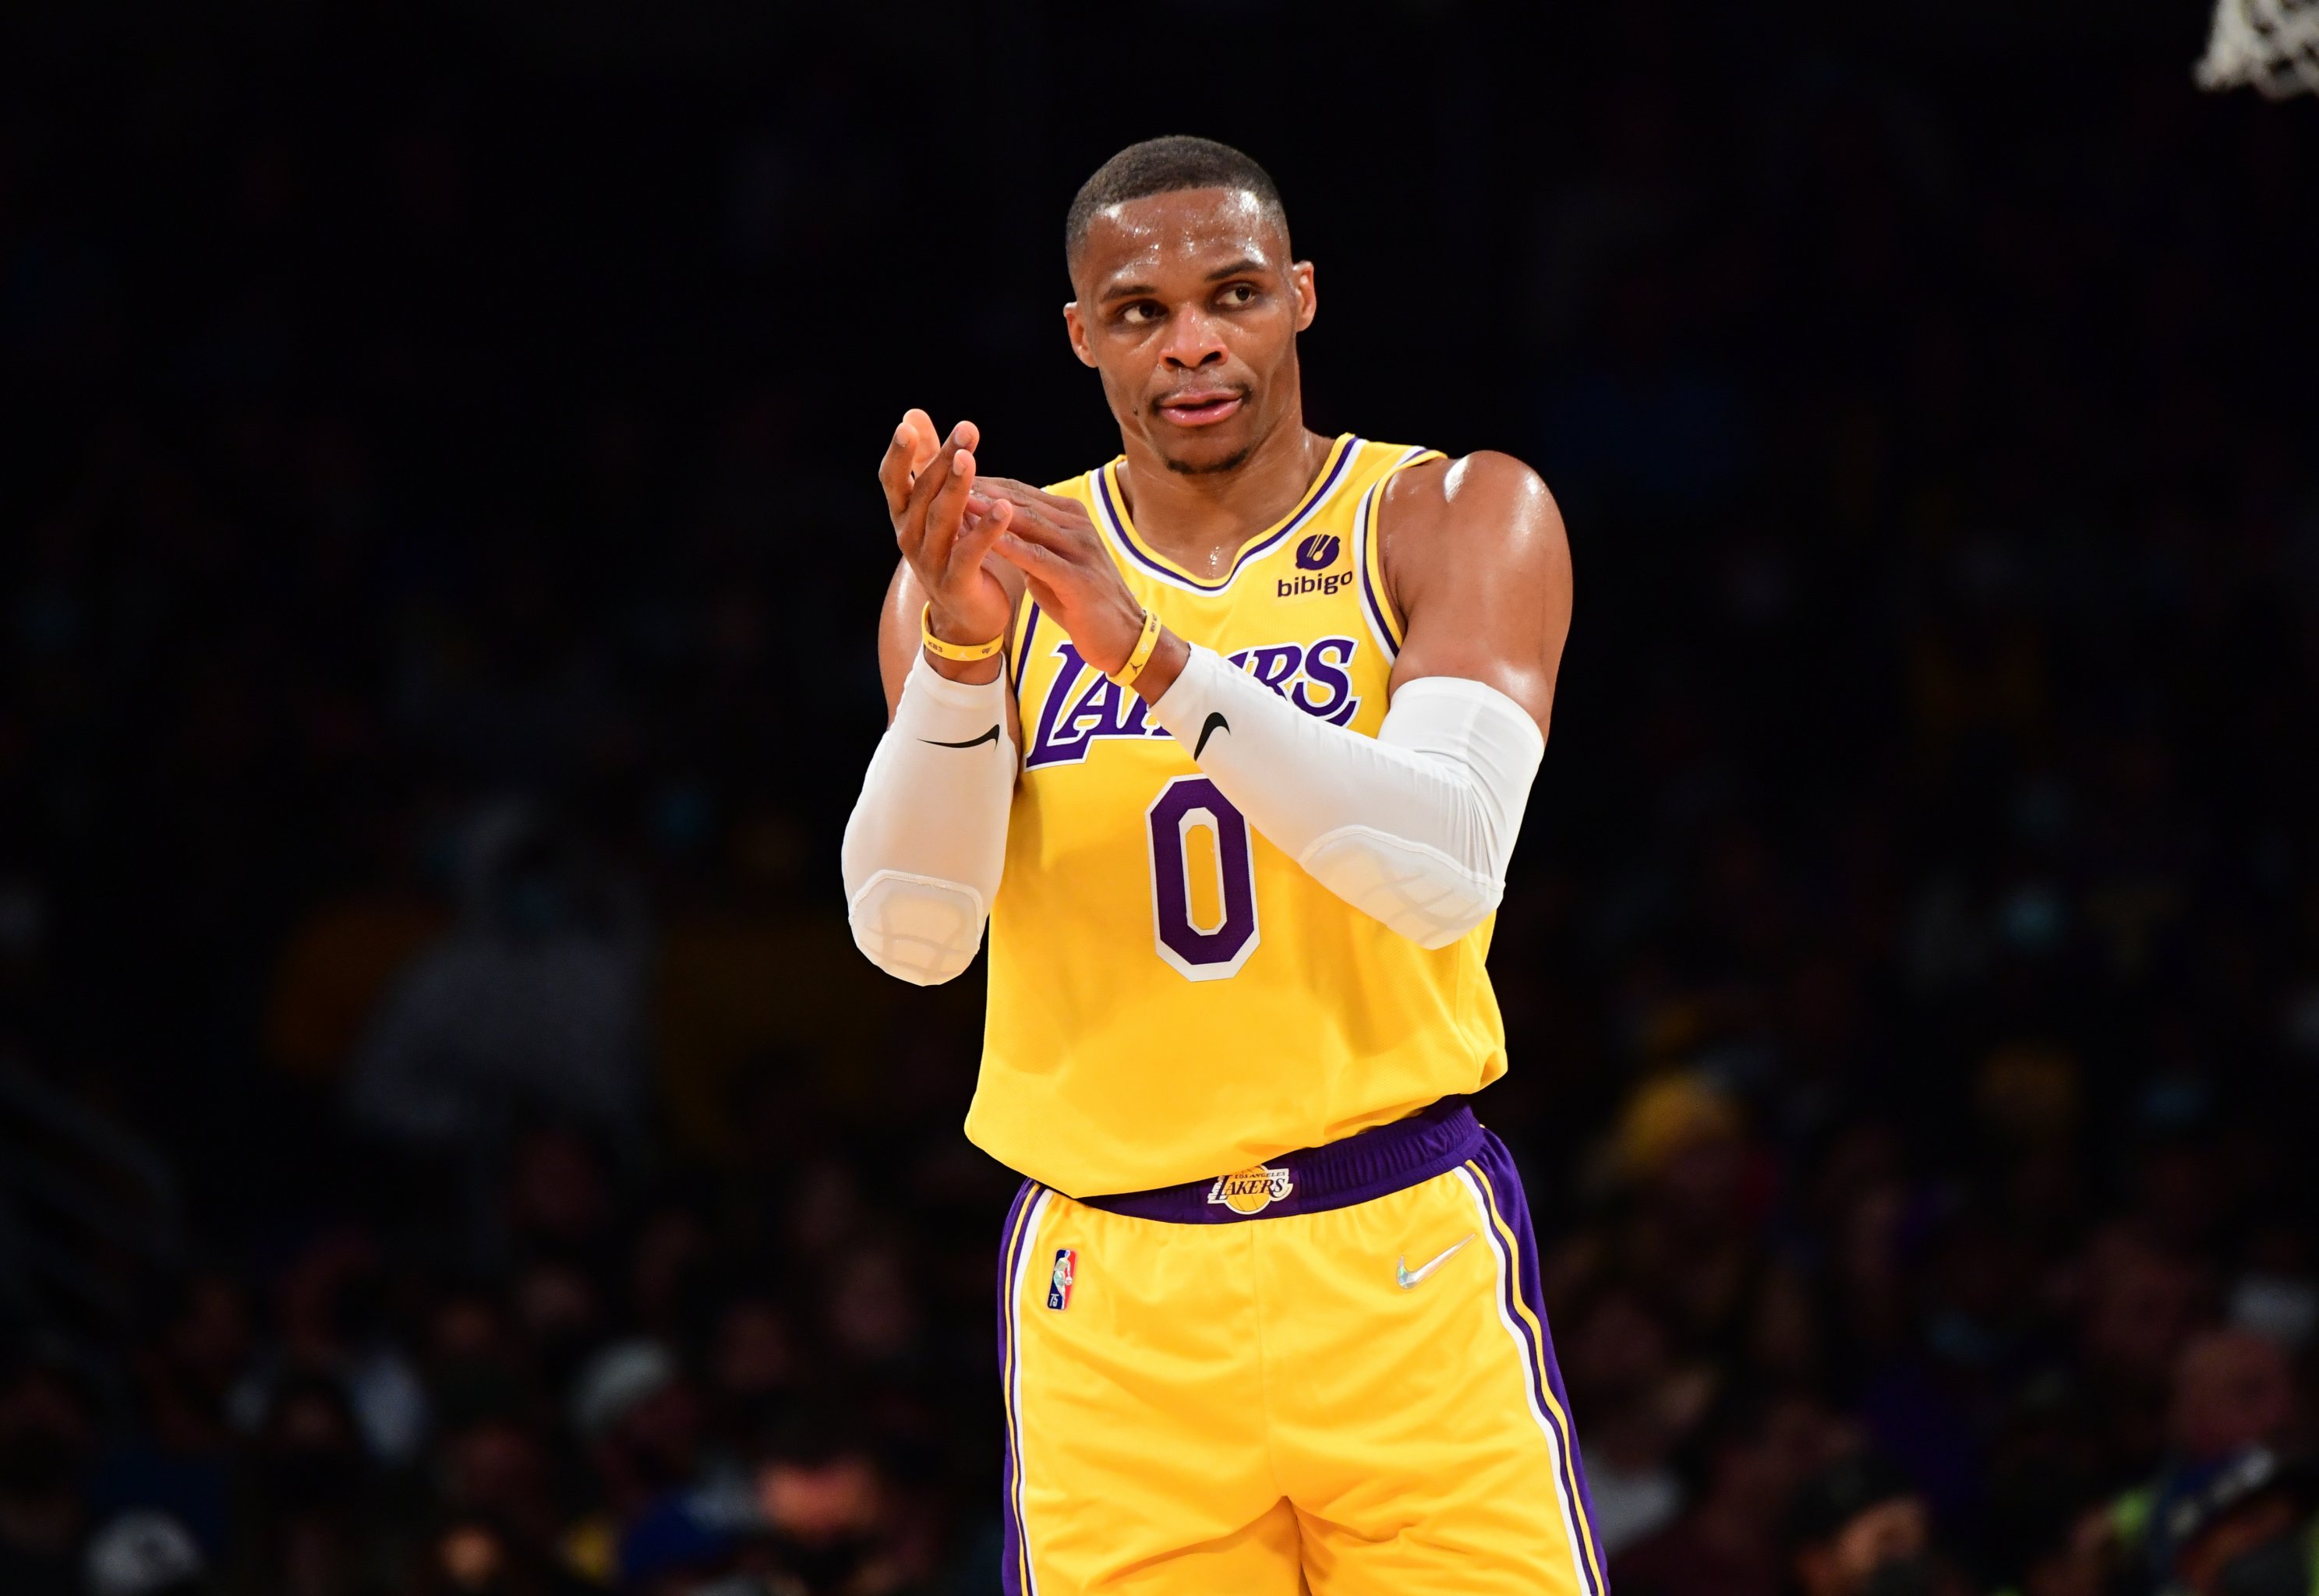 Lakers 2021-22 preview: A closer look at the roster – Orange